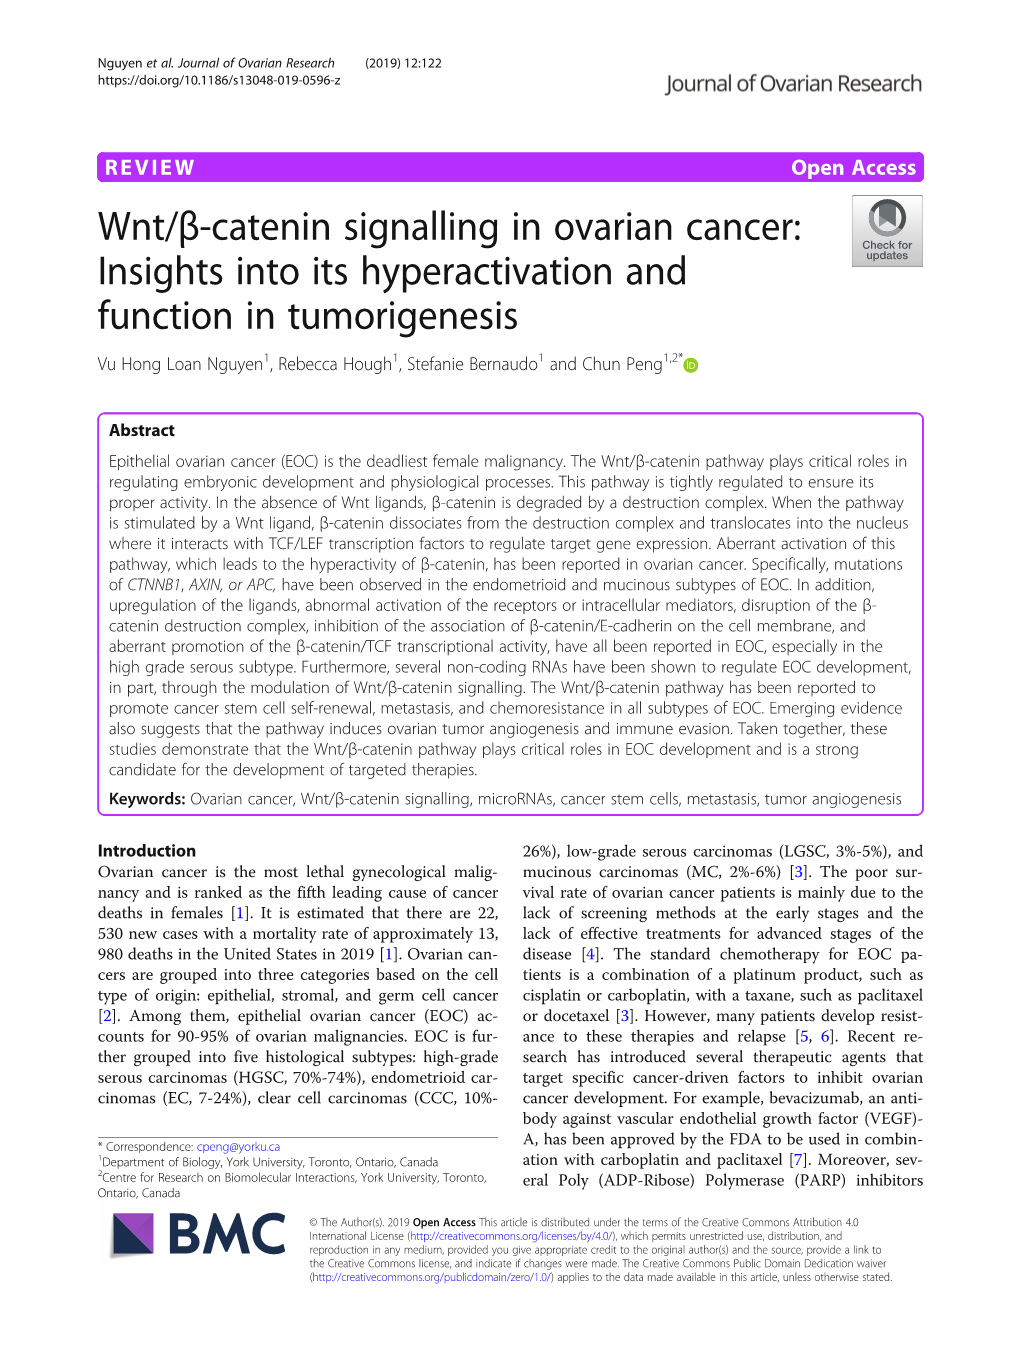 Wnt/Β-Catenin Signalling in Ovarian Cancer: Insights Into Its